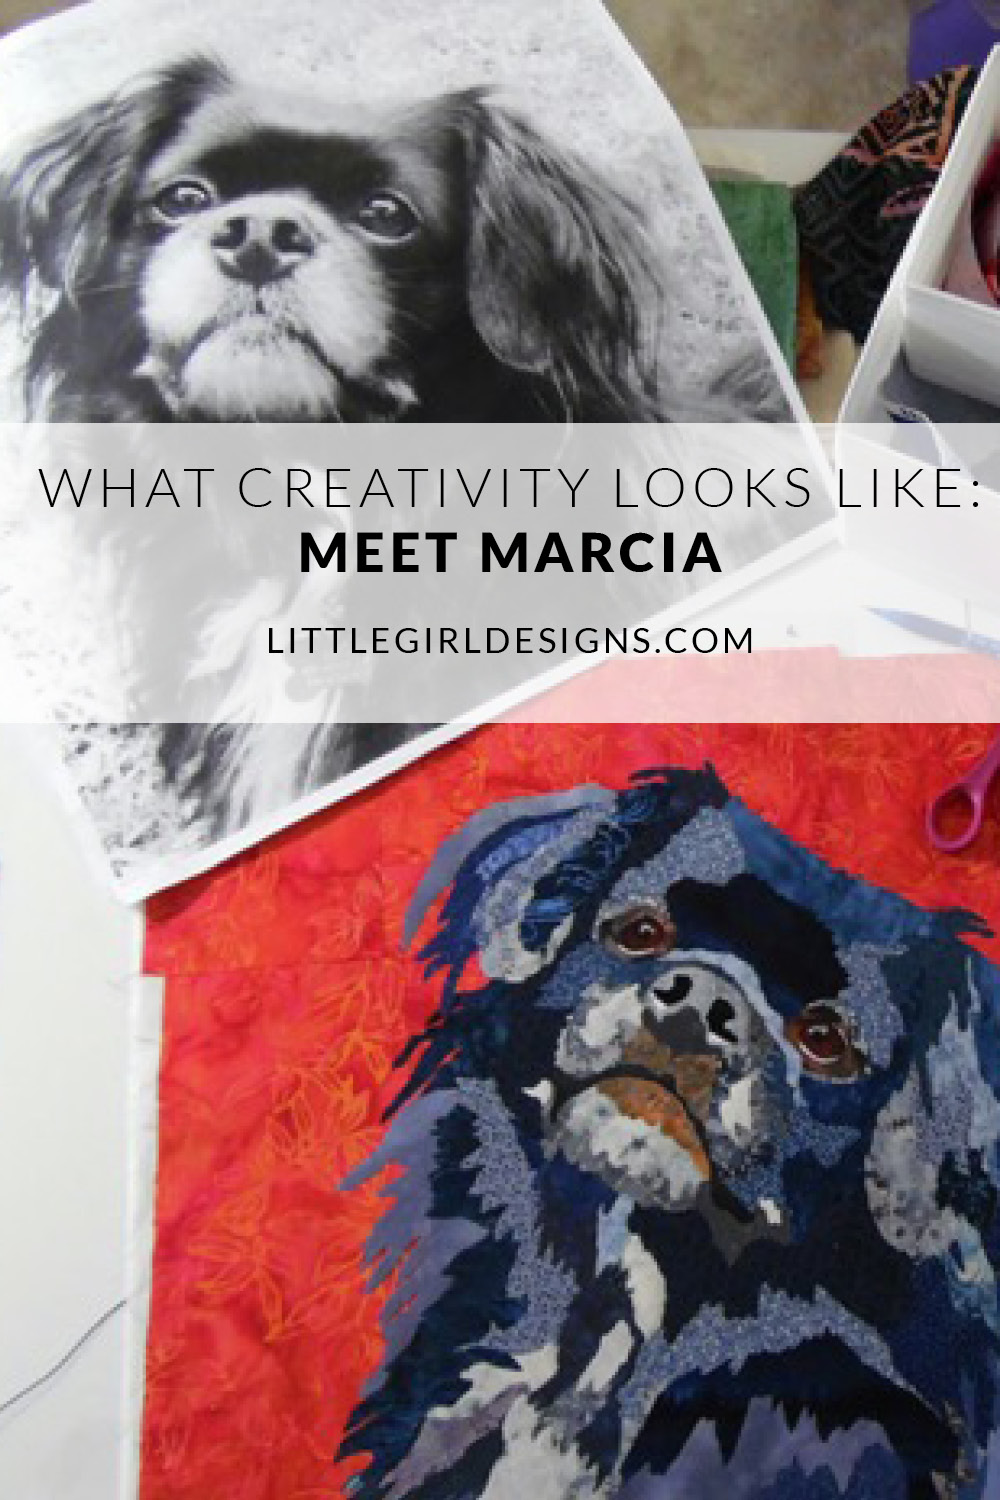 Marcia's quilts are incredible! Come read a bit about her process and what creativity looks like for her.